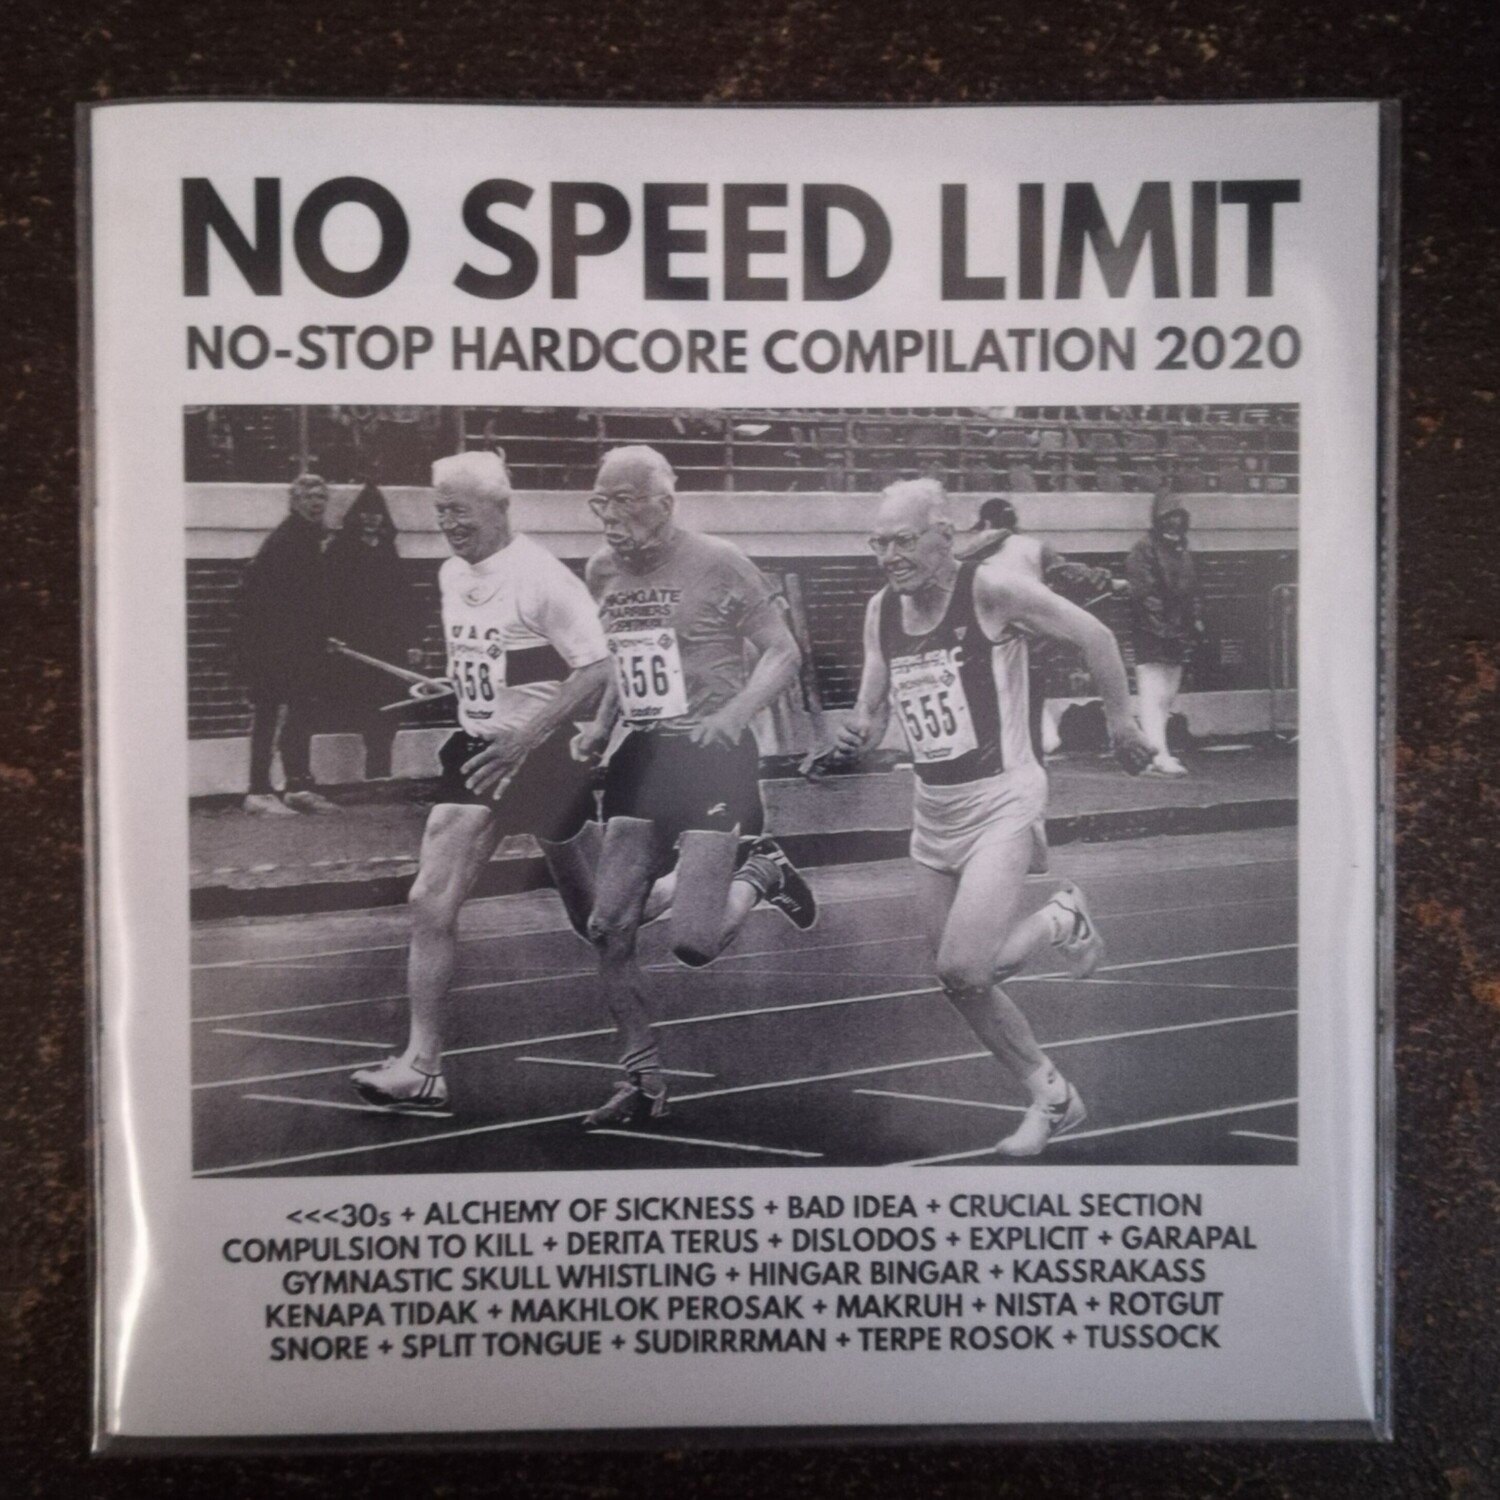 NO SPEED LIMIT – No-stop Hardcore Compilation 2020.